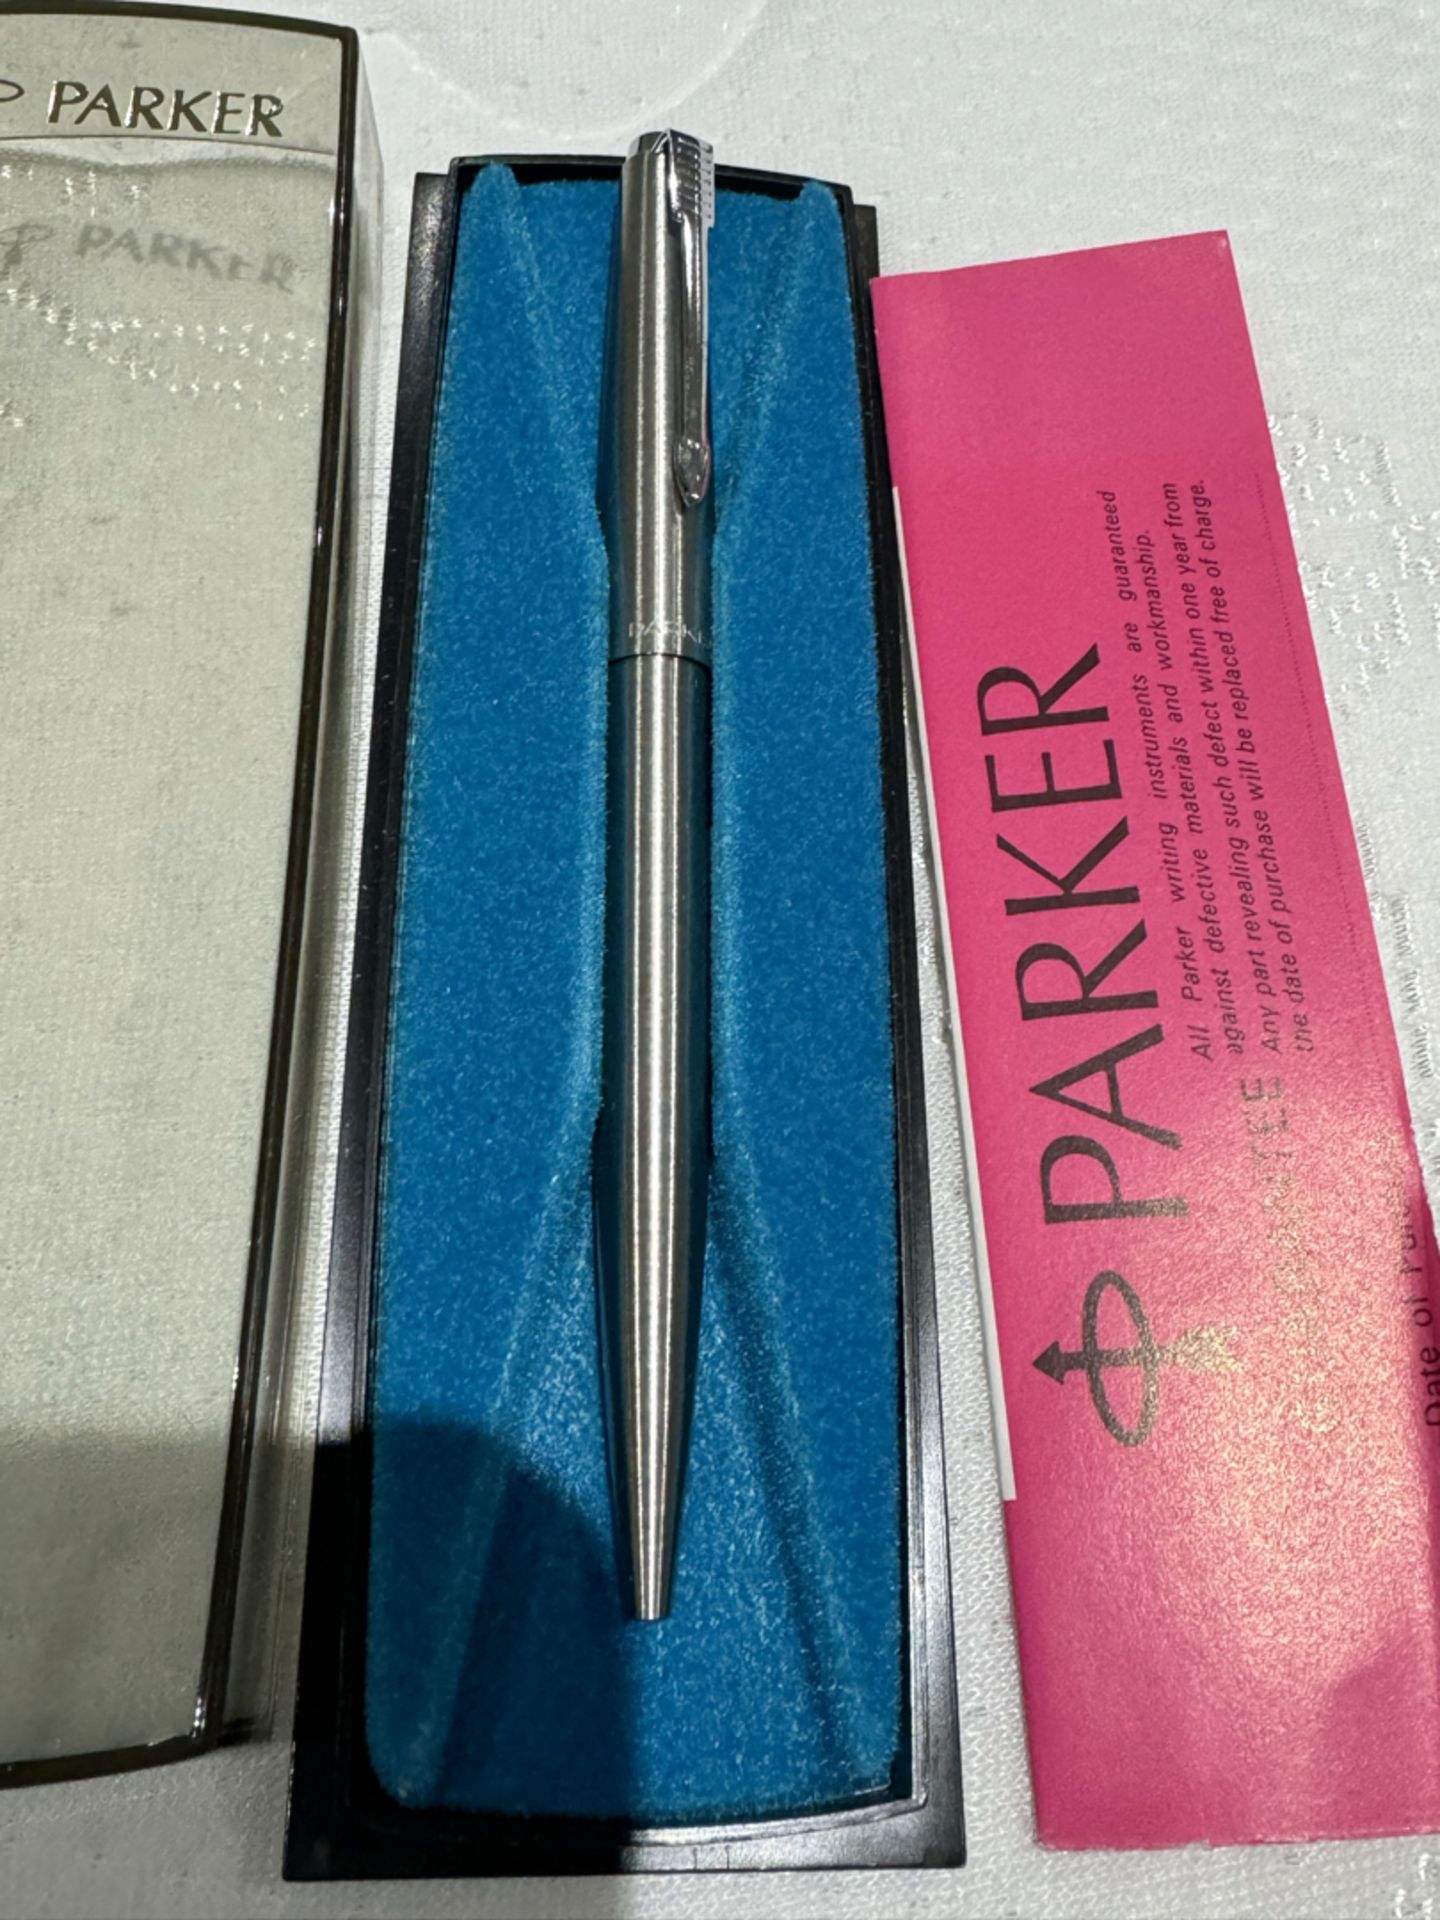 Vintage Parker Pen in Original Box - Looks new but some discolouration to packaging - NO VAT ! - Image 3 of 3